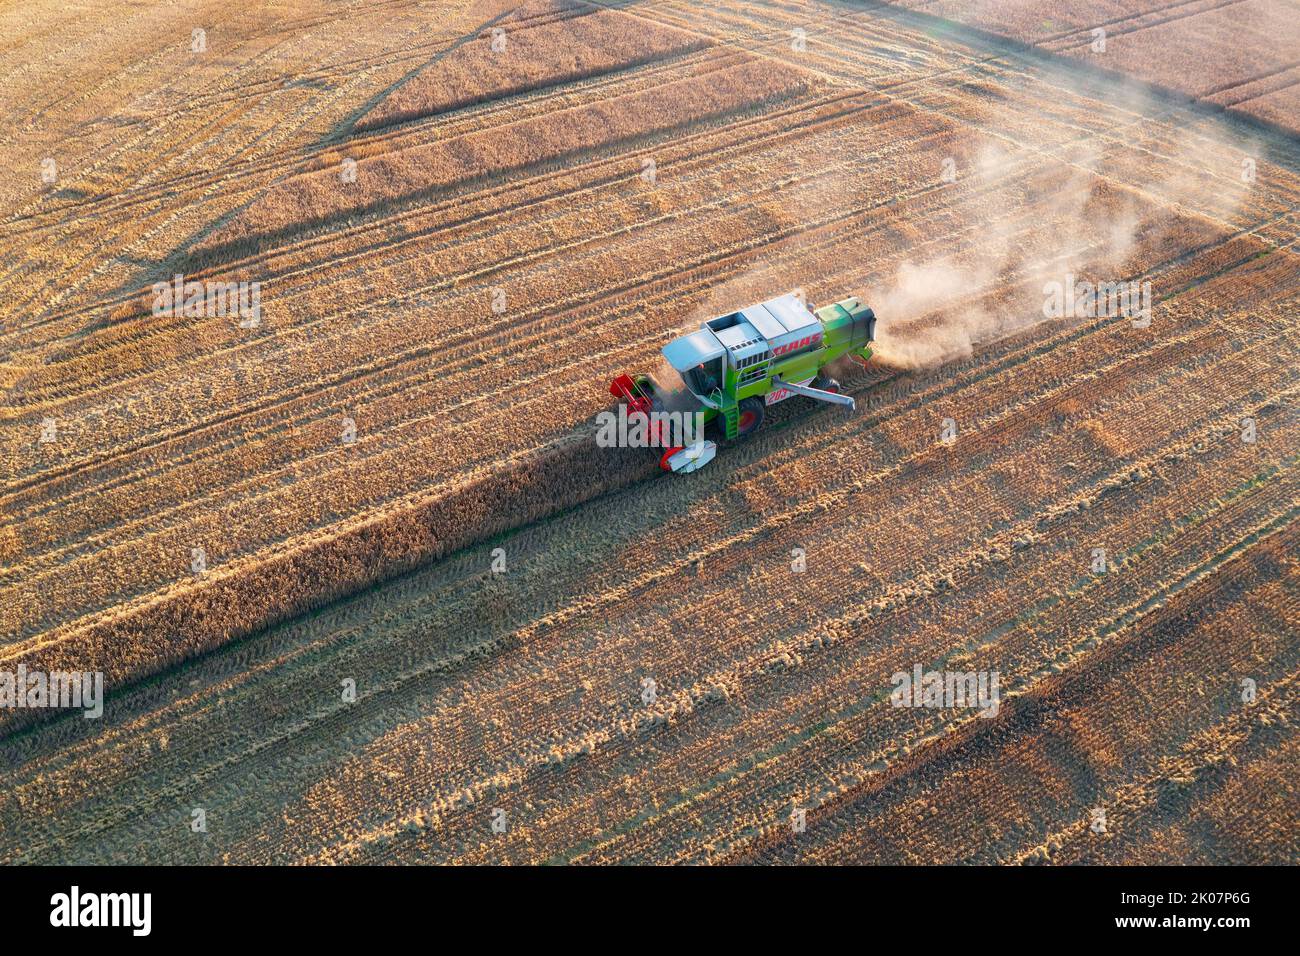 Combine harvester harvesting crops during sunset in Scotland Stock Photo